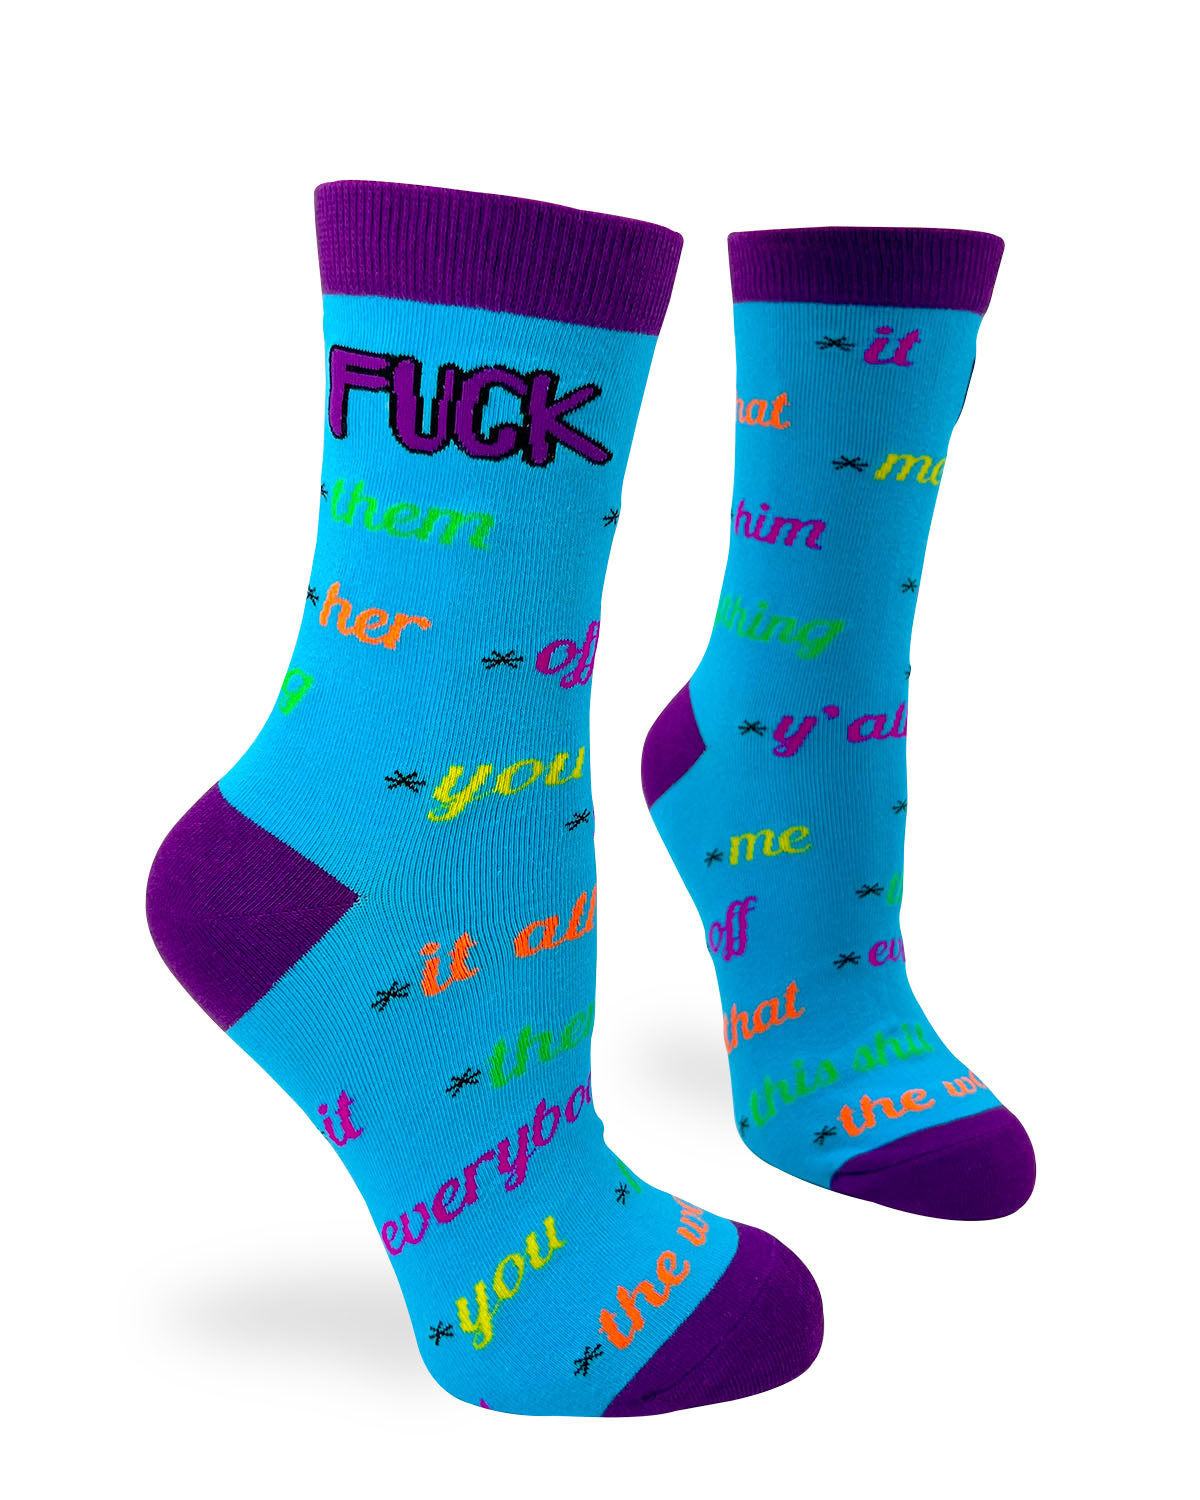 Fuck everything ladies novelty socks with curse words